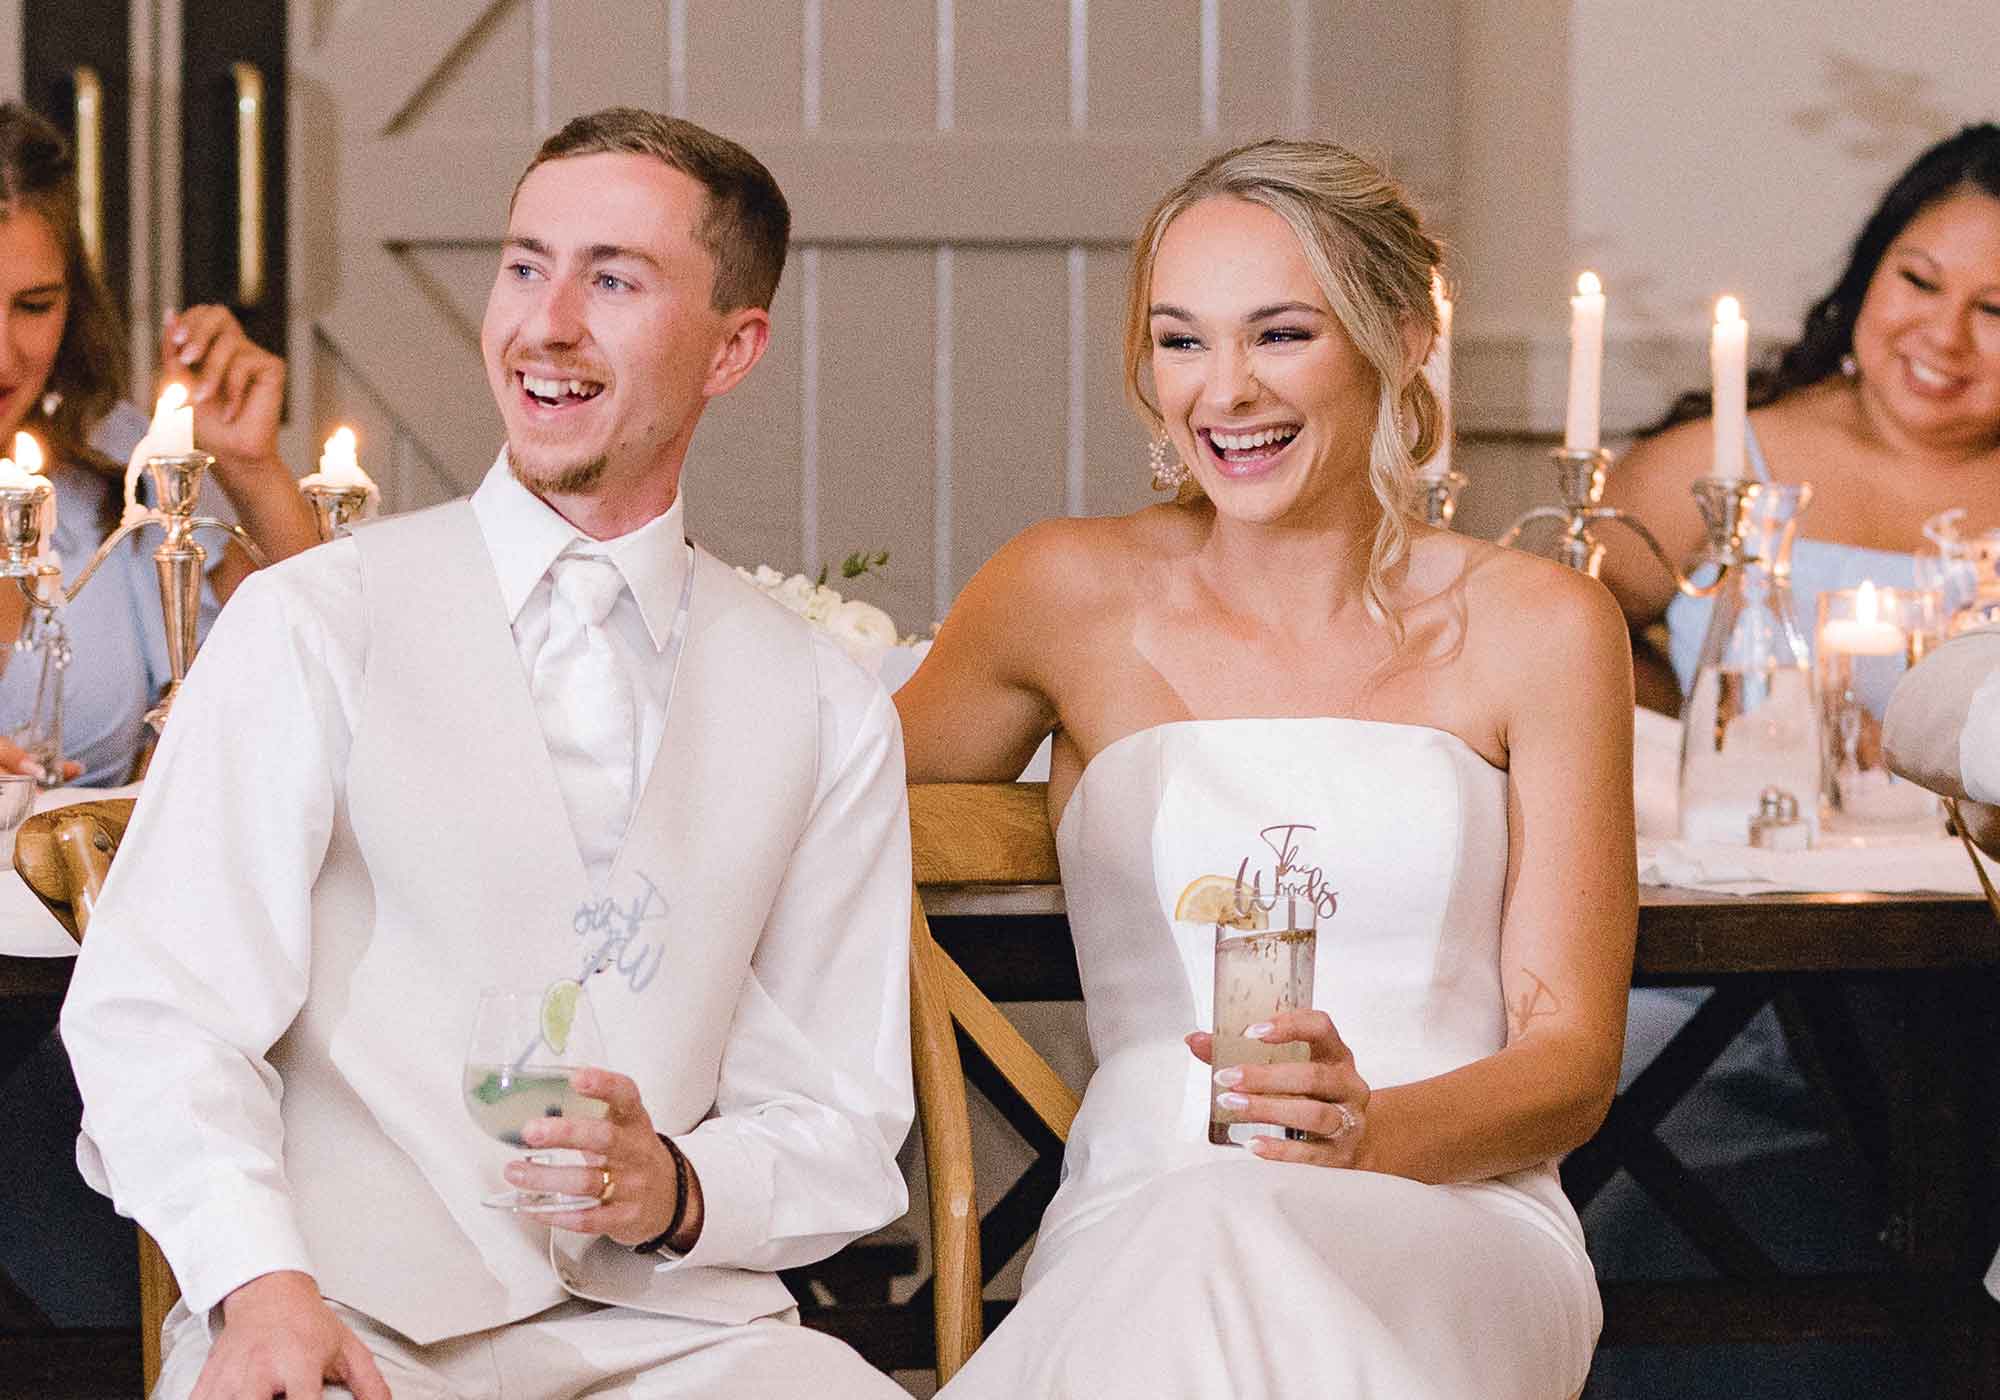 The bride and groom customized cocktails at this Virginia winery wedding